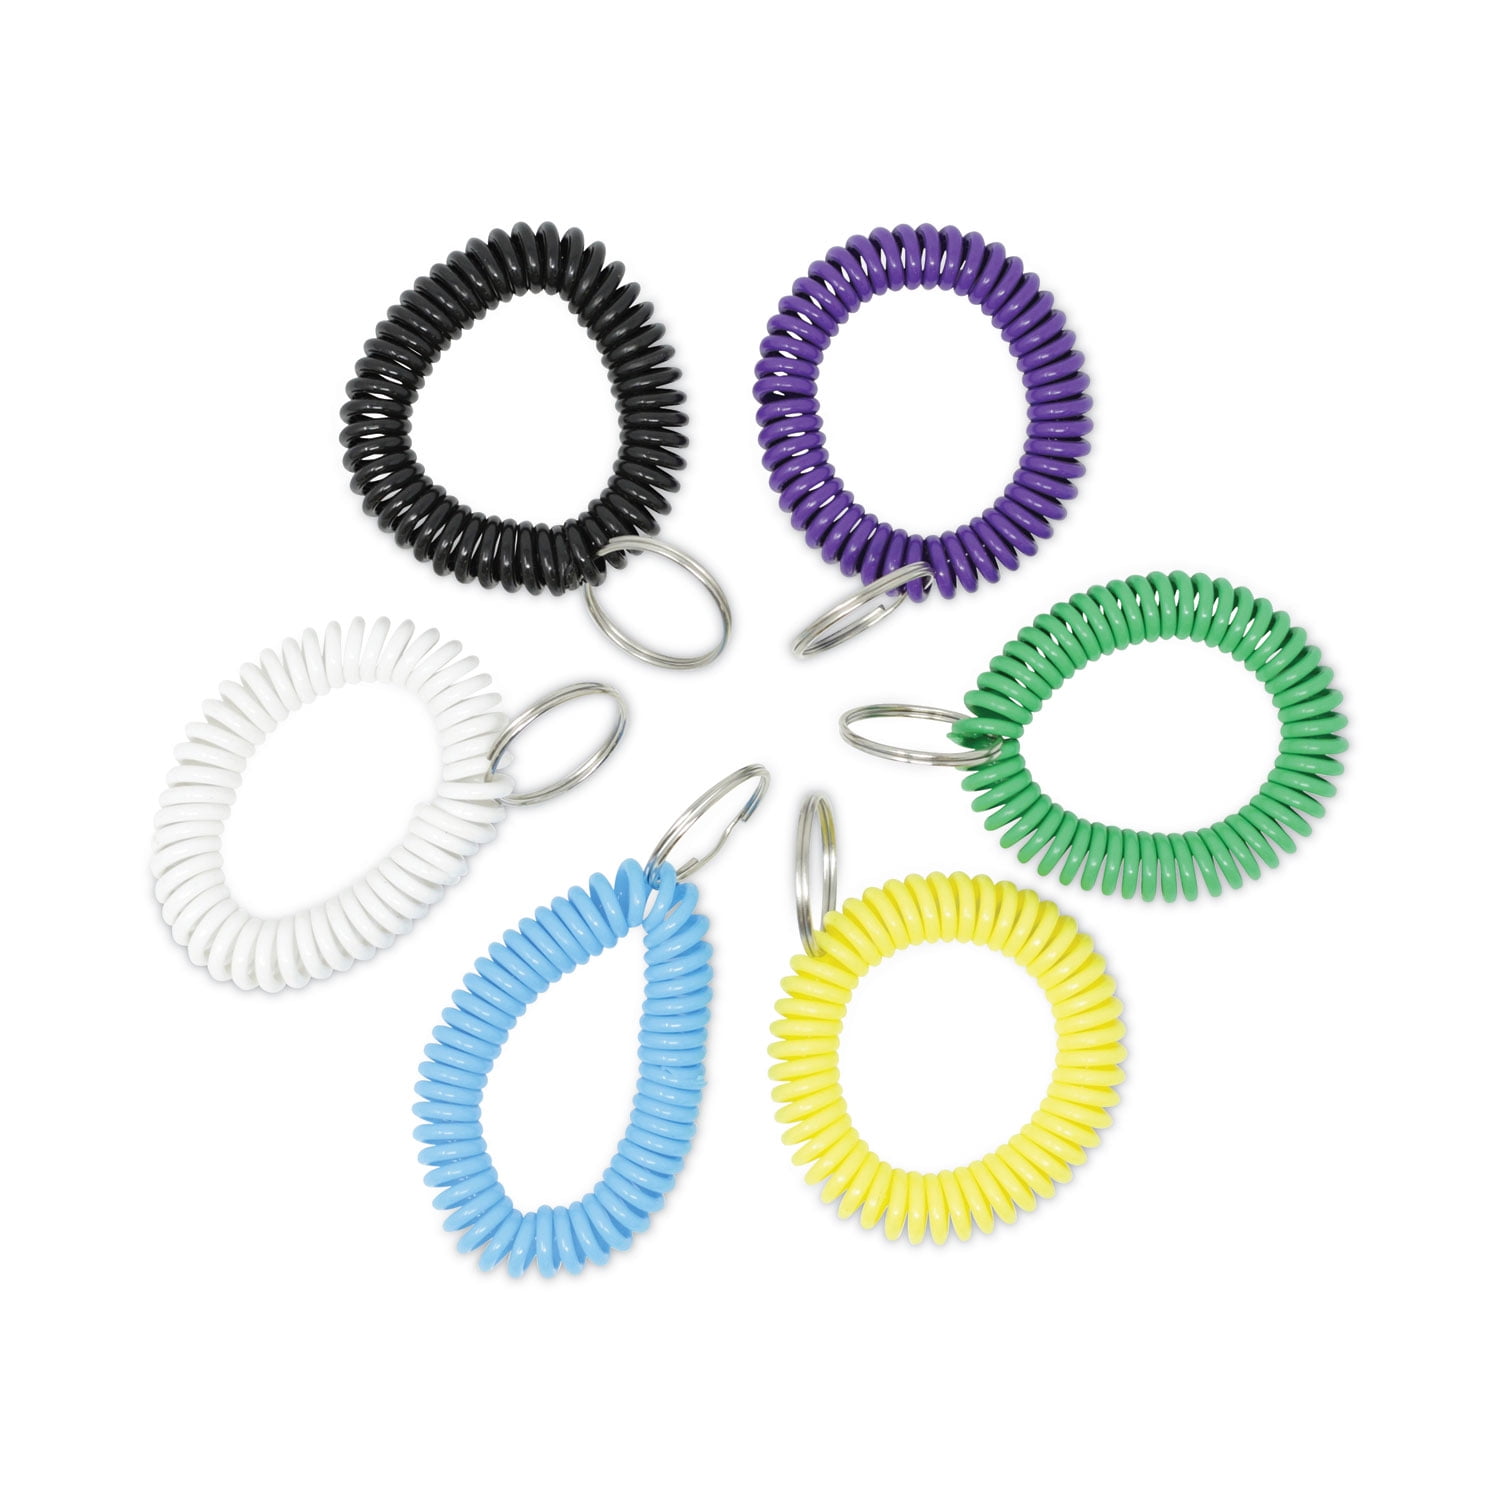 7-Pack Assorted Color Stretchable Plastic Bracelet Wrist Coil Wrist band  Key Ring Chain Holder Tag